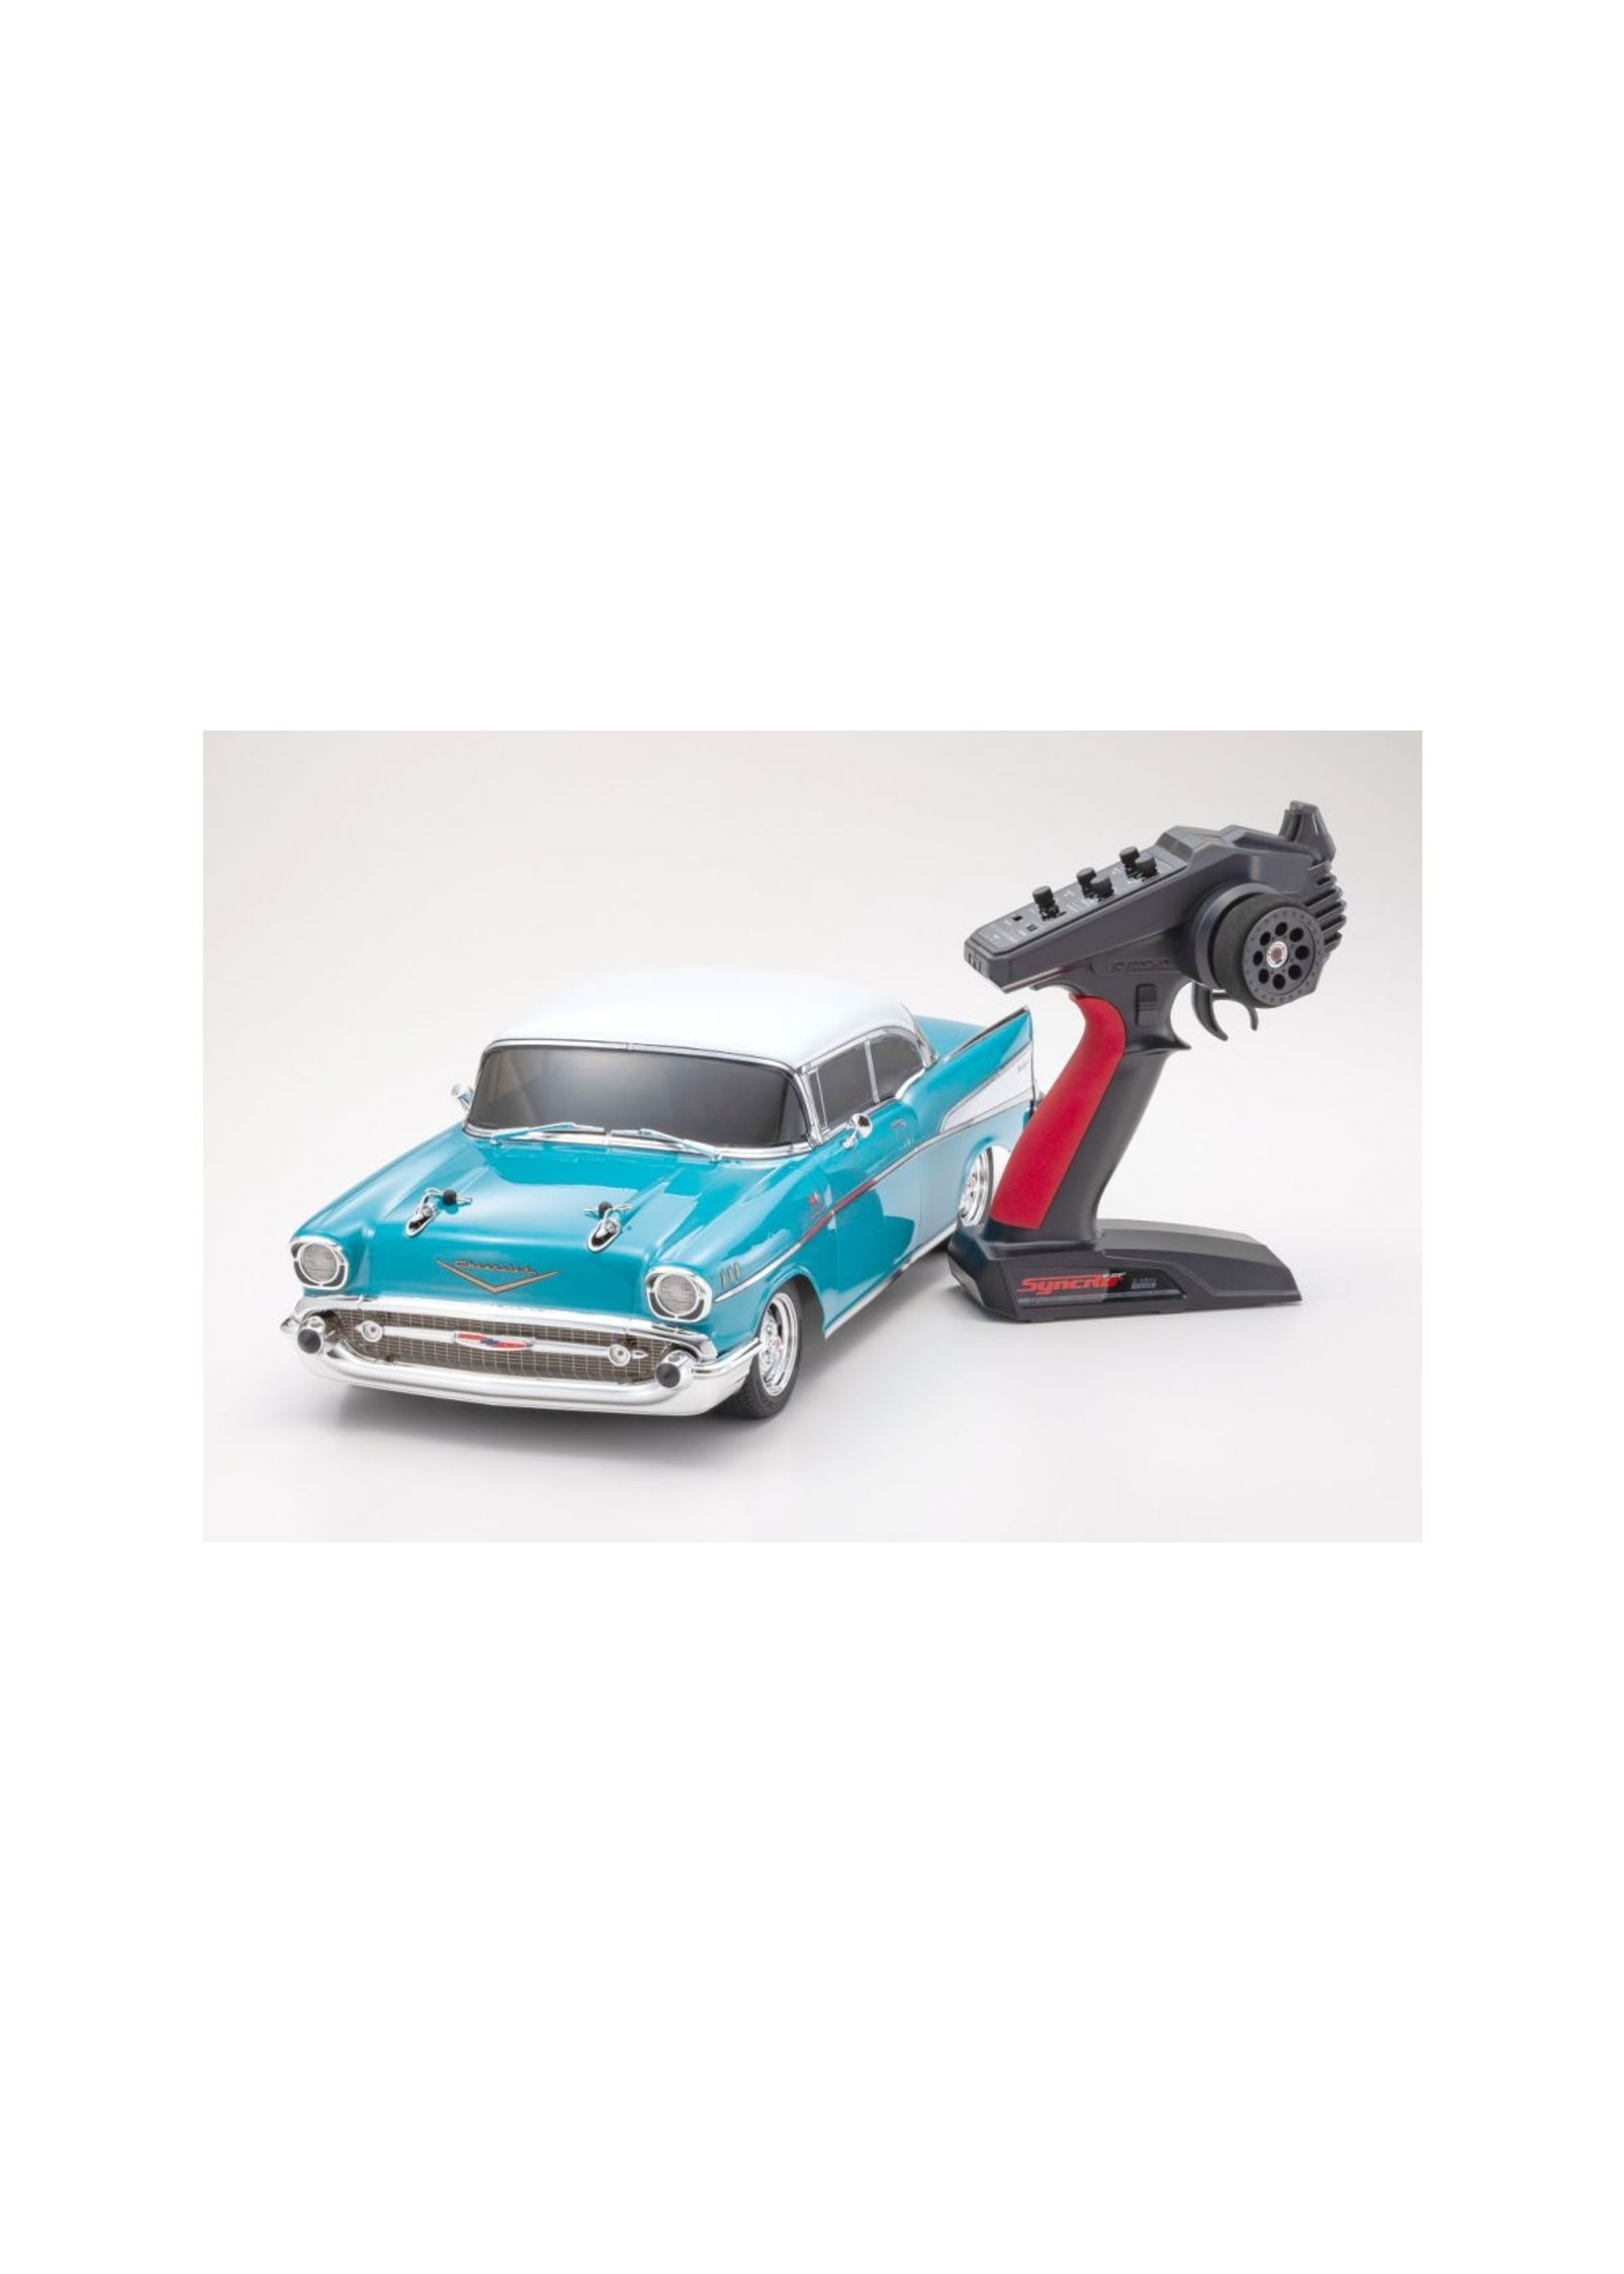 Kyosho 1/10 Fazer Mk2 1957 Bel Air Coupe - Tropical Turquoise